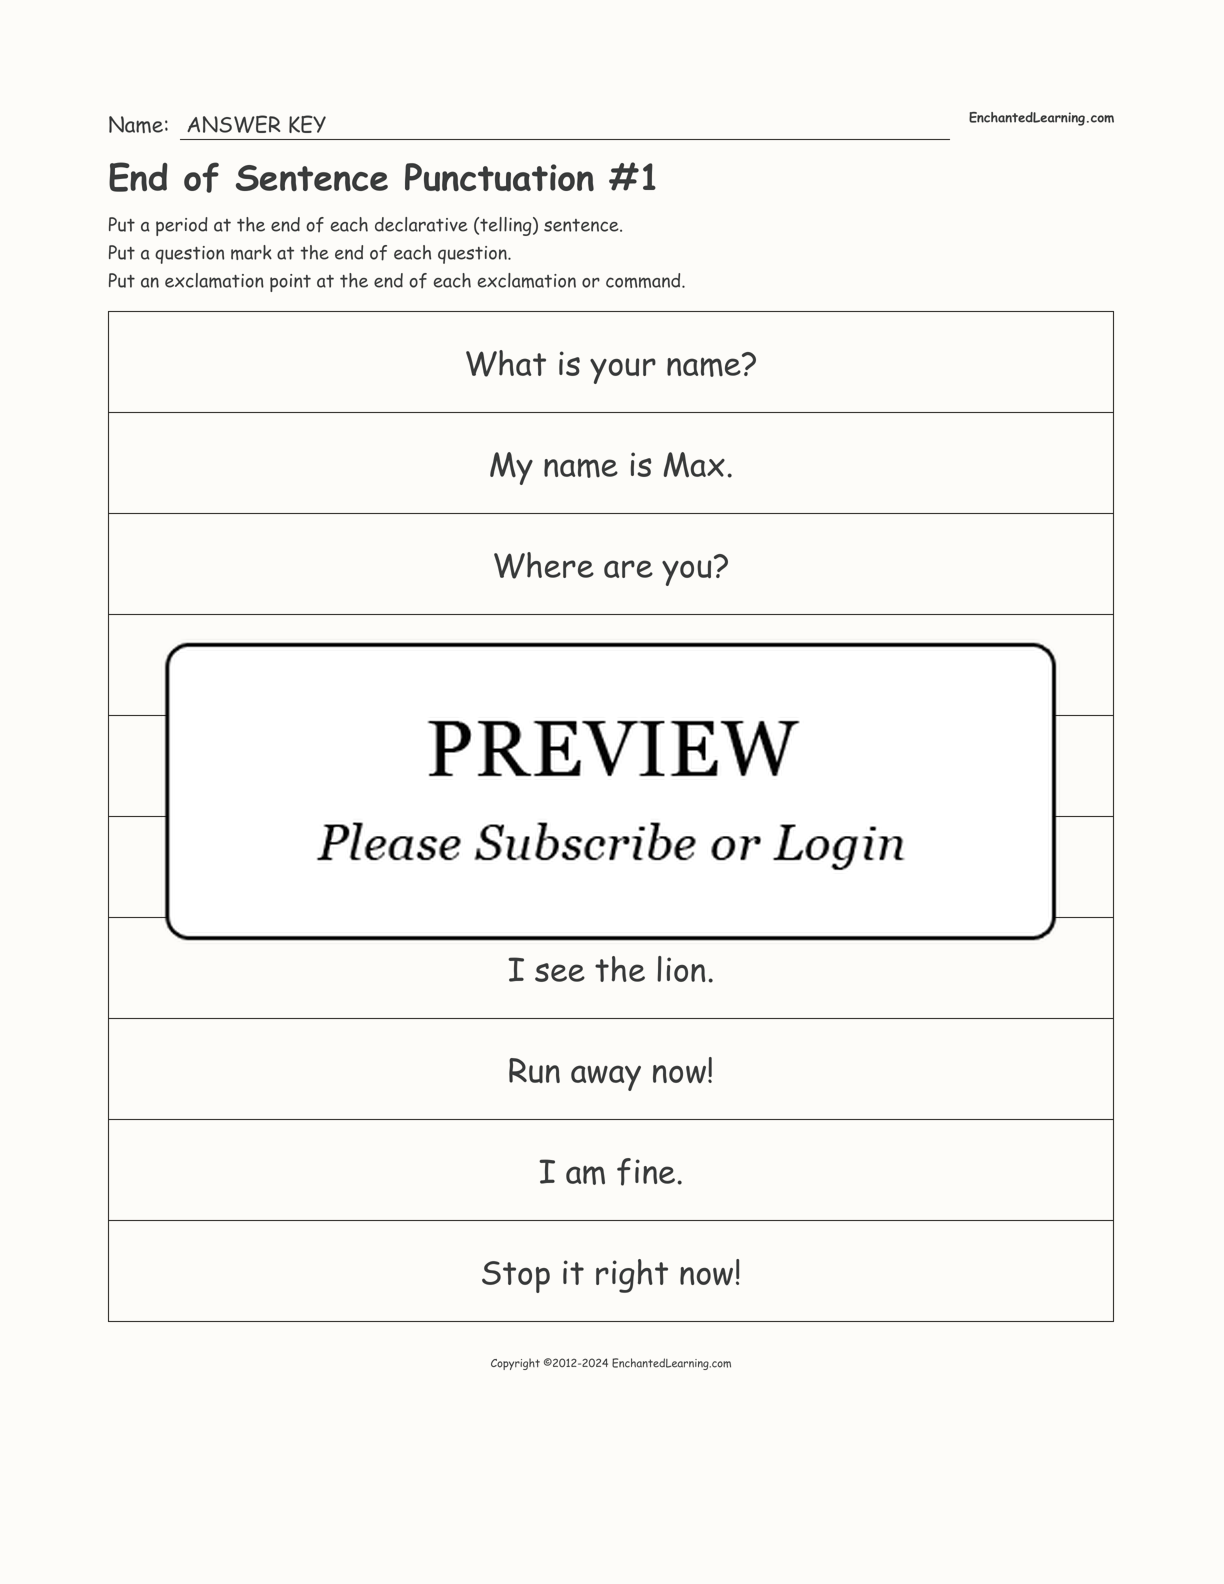 End of Sentence Punctuation #1 interactive worksheet page 2